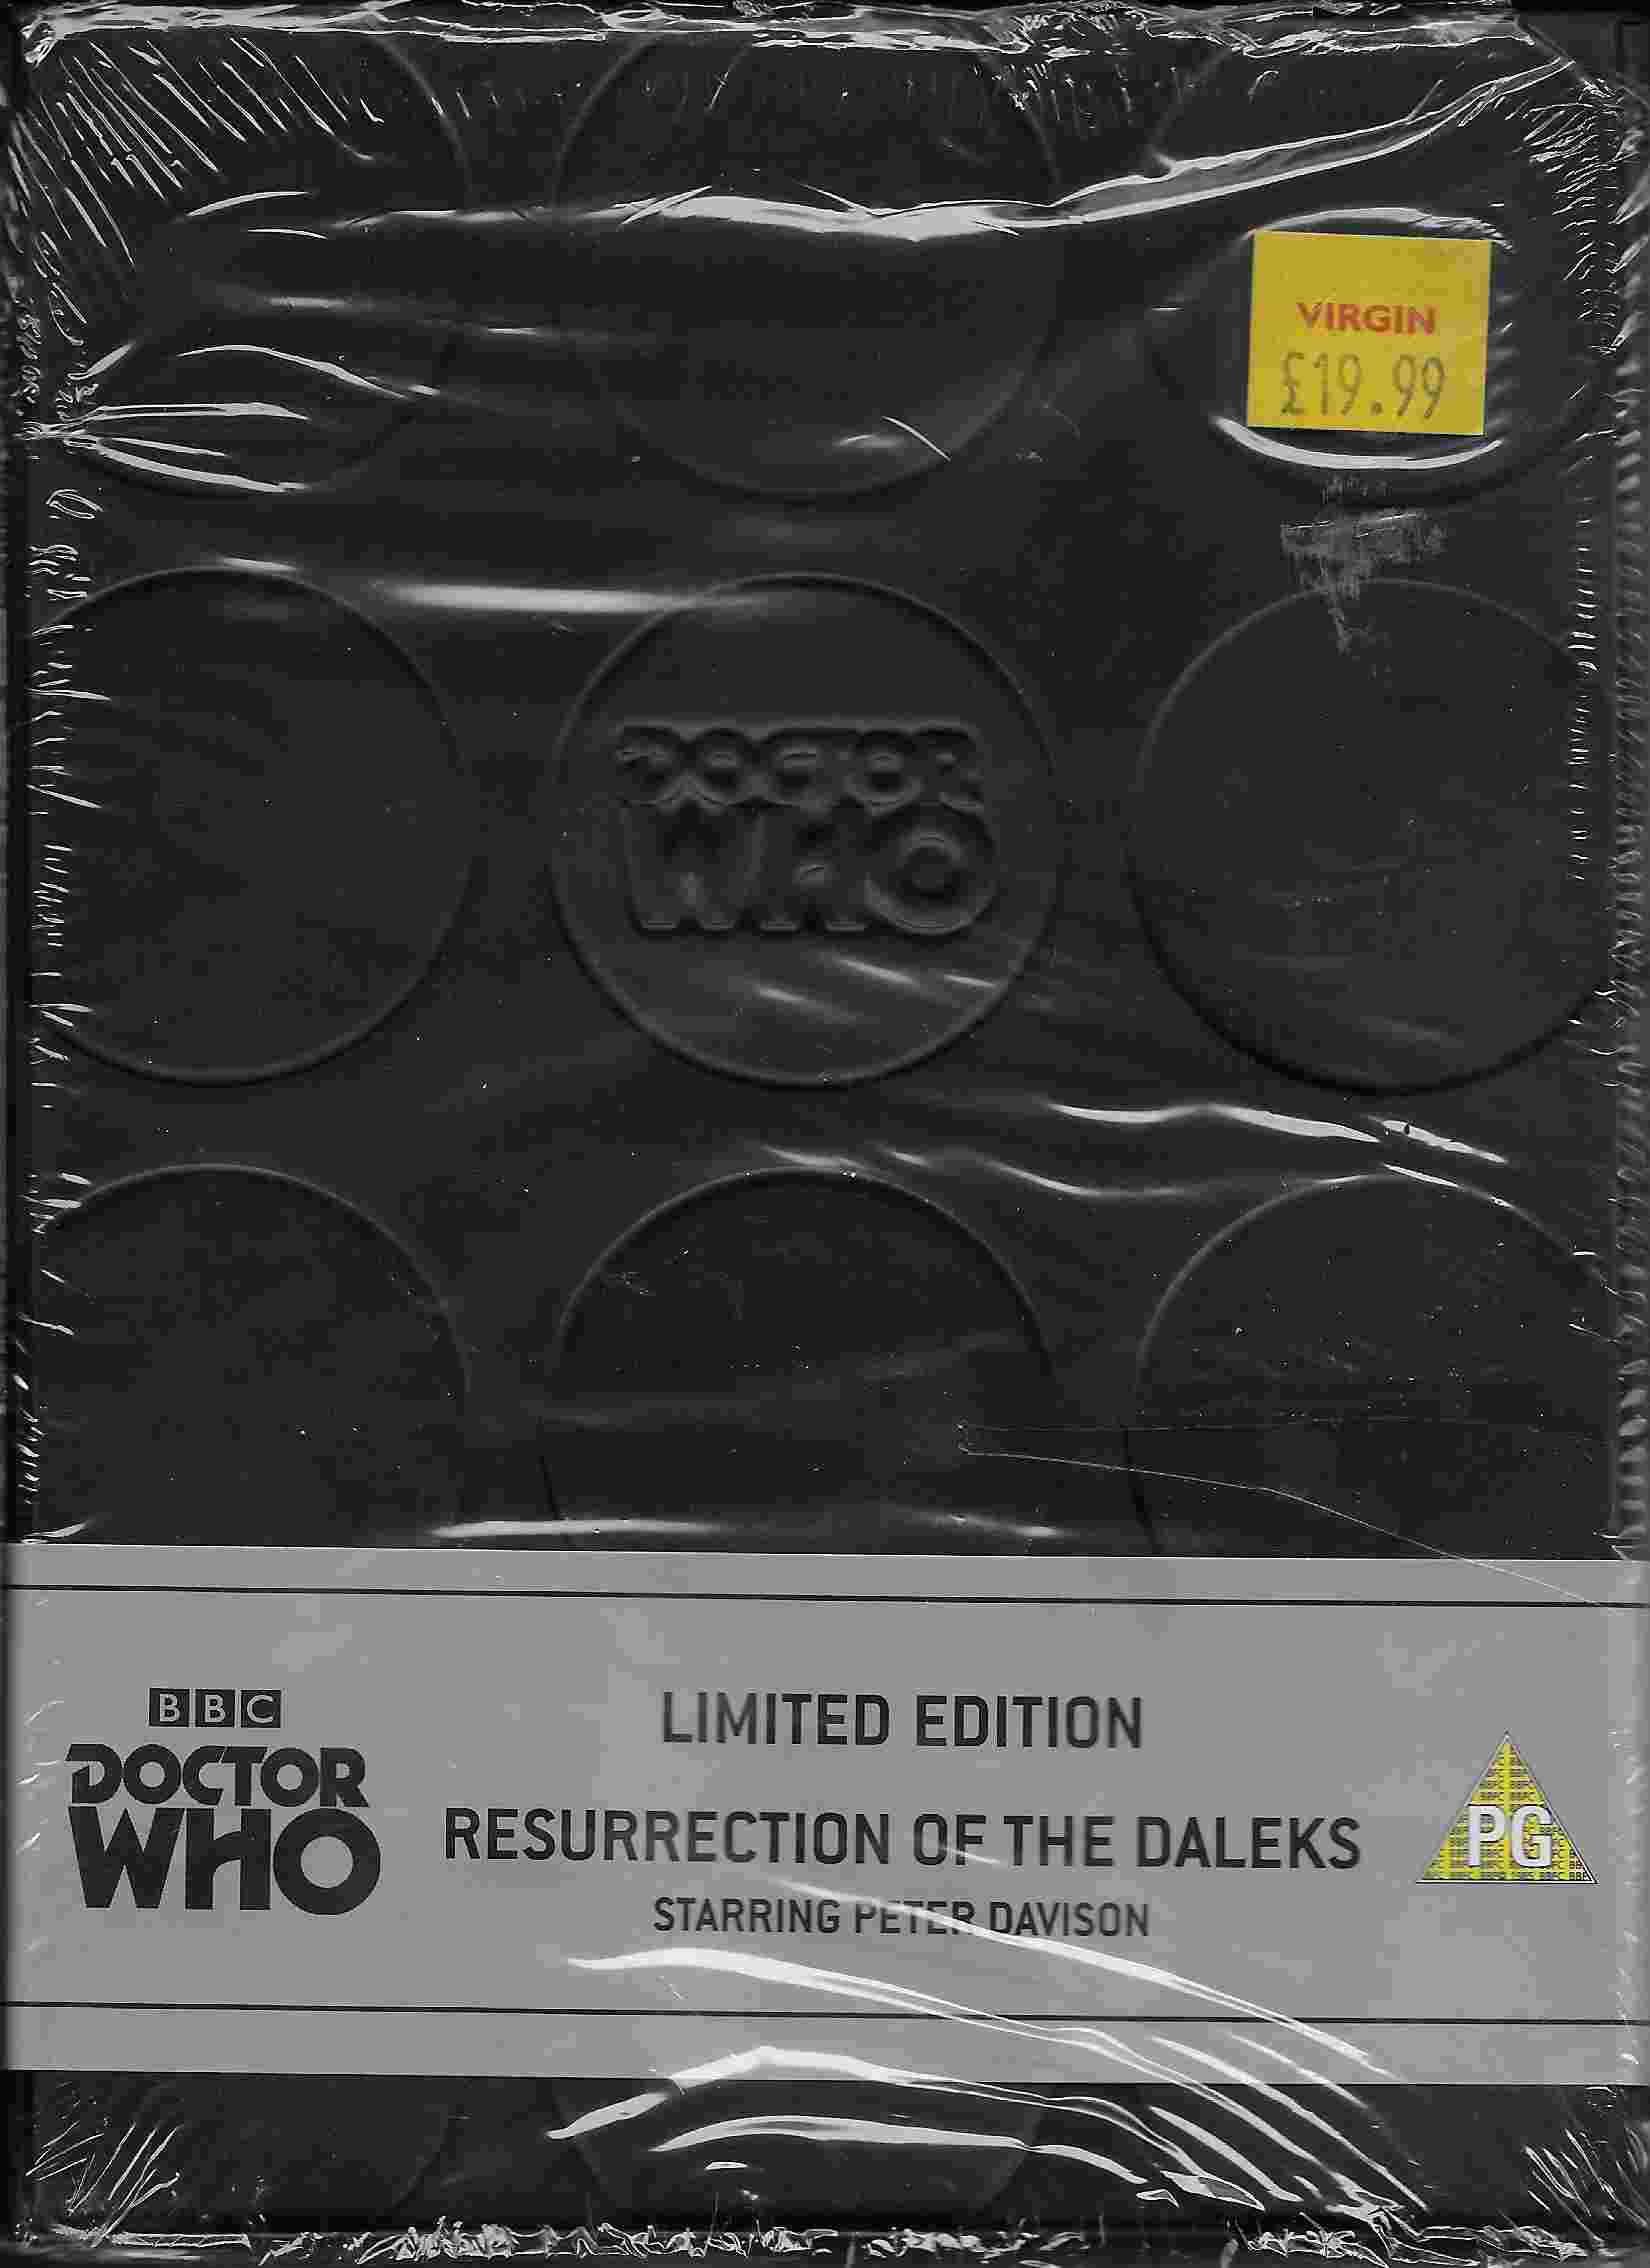 Picture of BBCDVD 1100 Doctor Who - Resurrection of the Daleks by artist Eric Saward from the BBC records and Tapes library